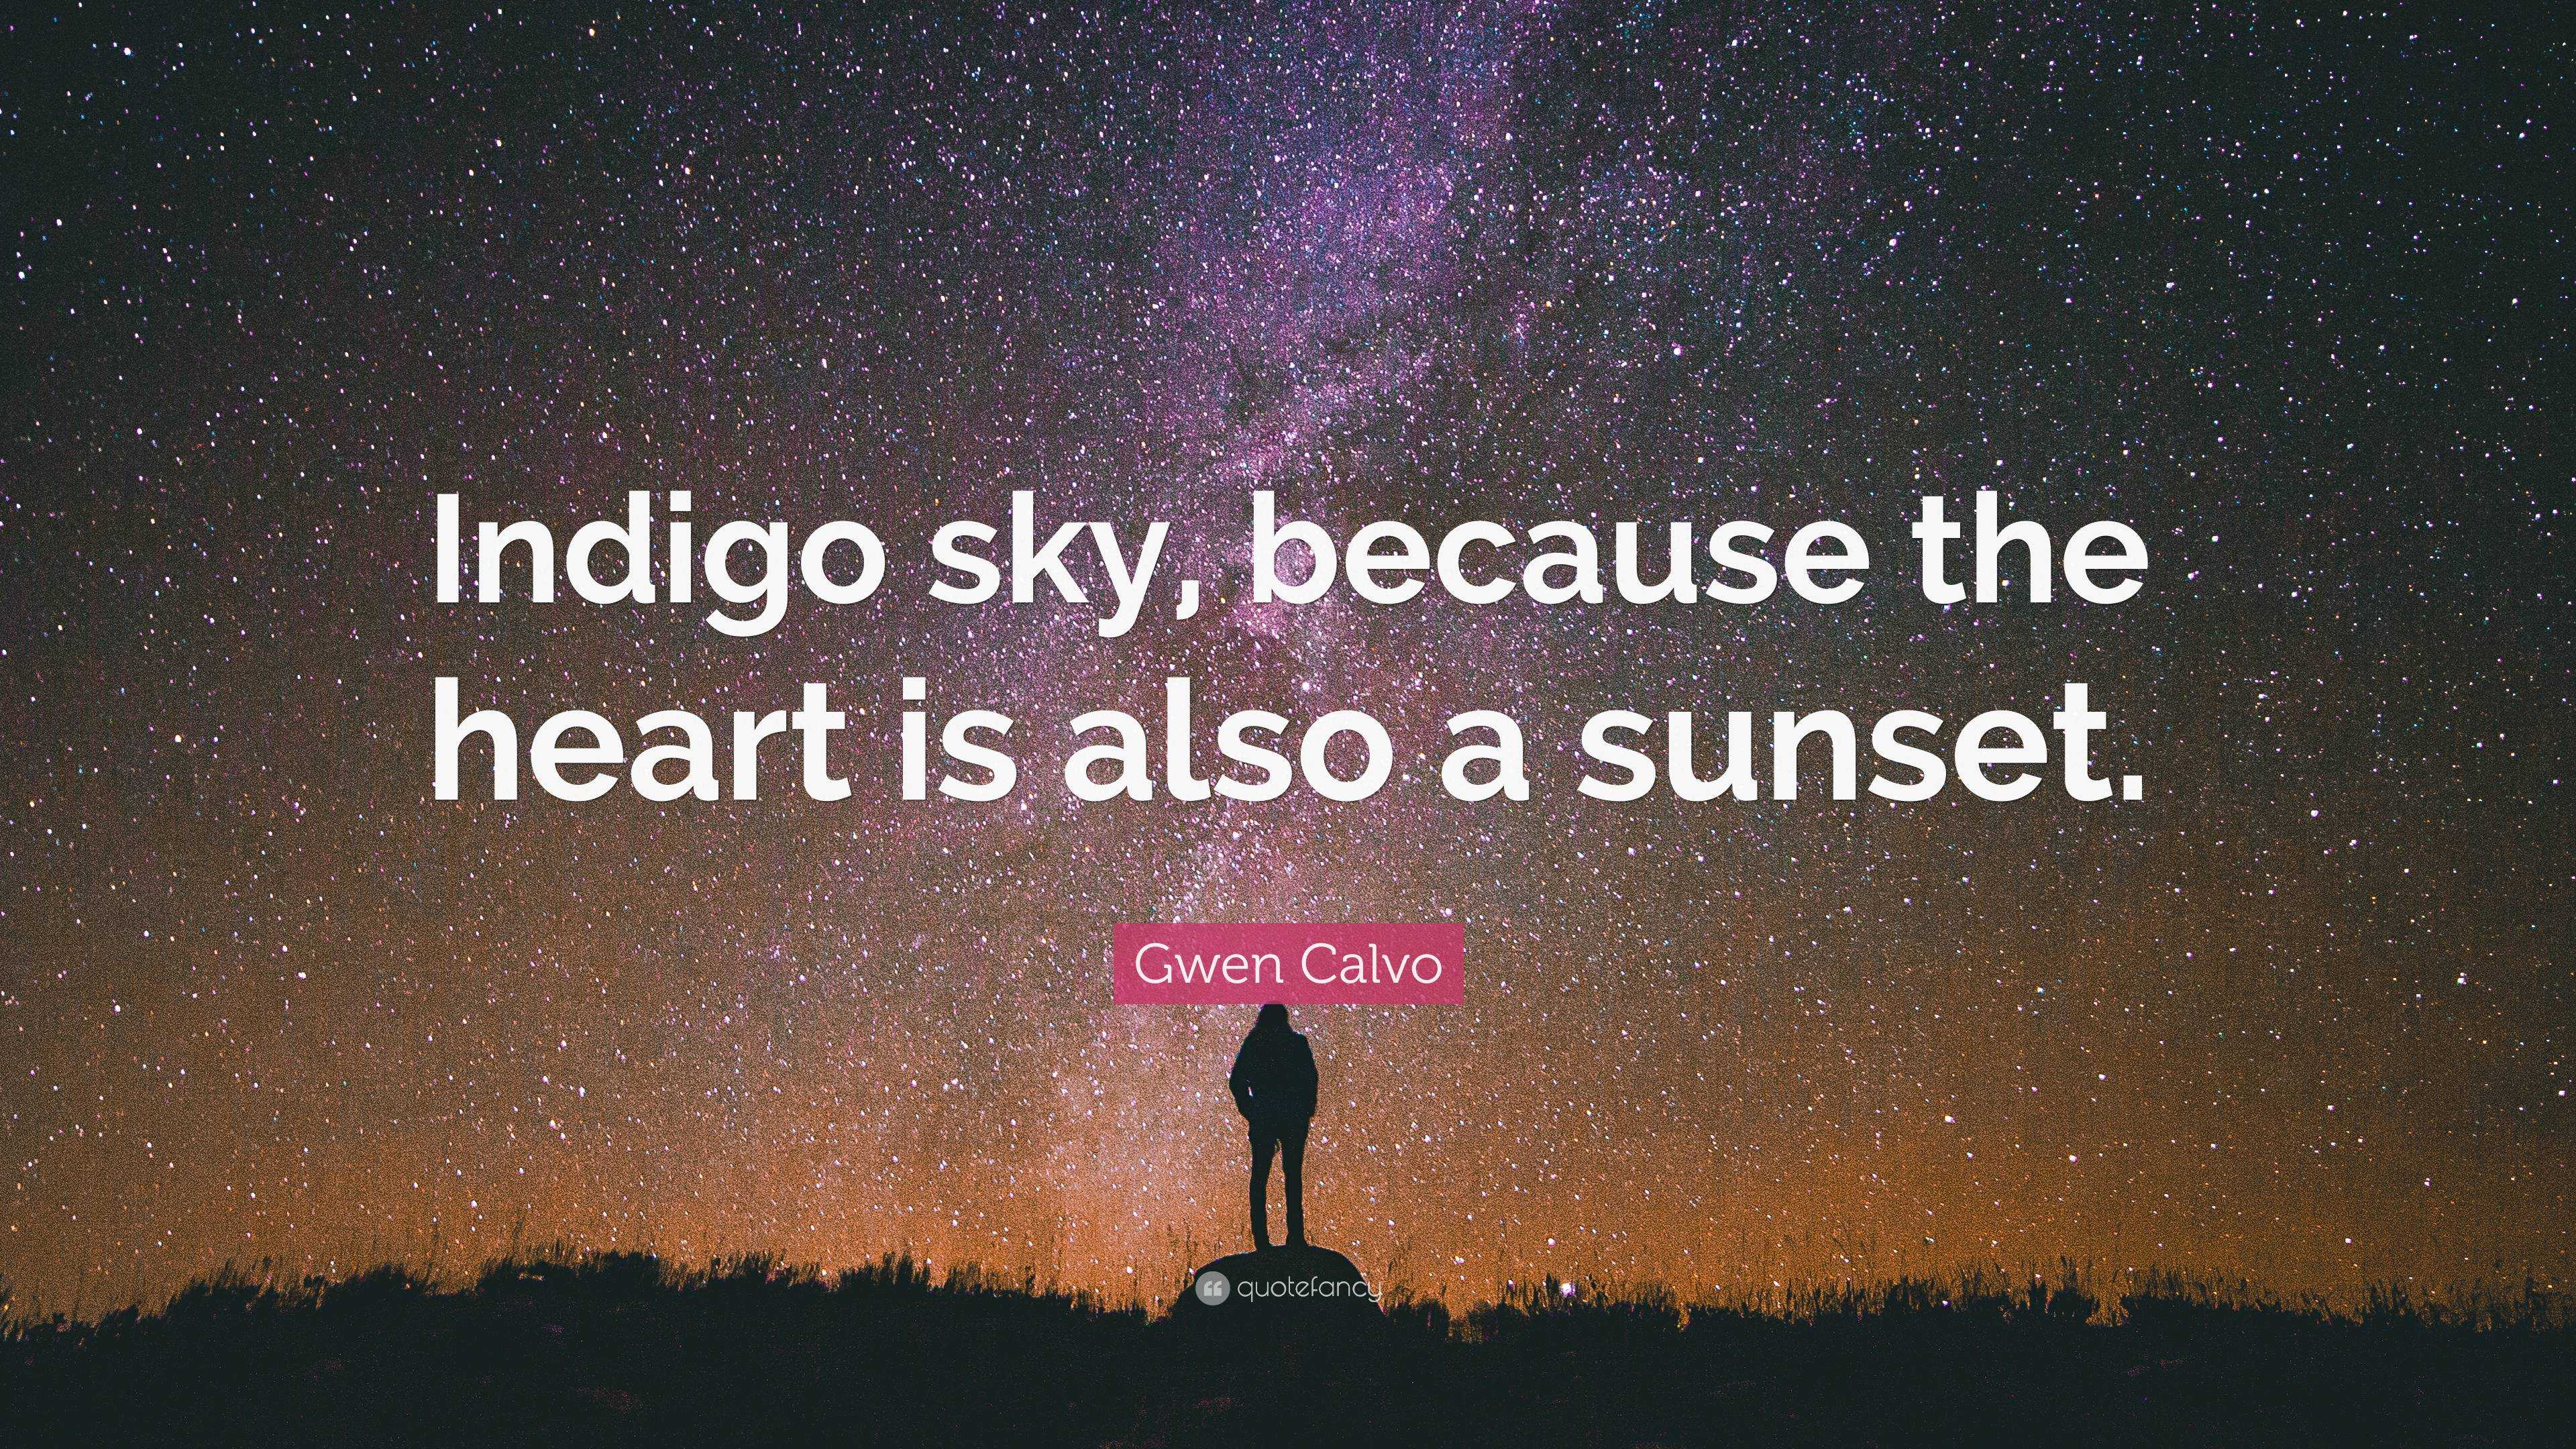 Gwen Calvo Quote: “Indigo sky, because the heart is also a sunset.”